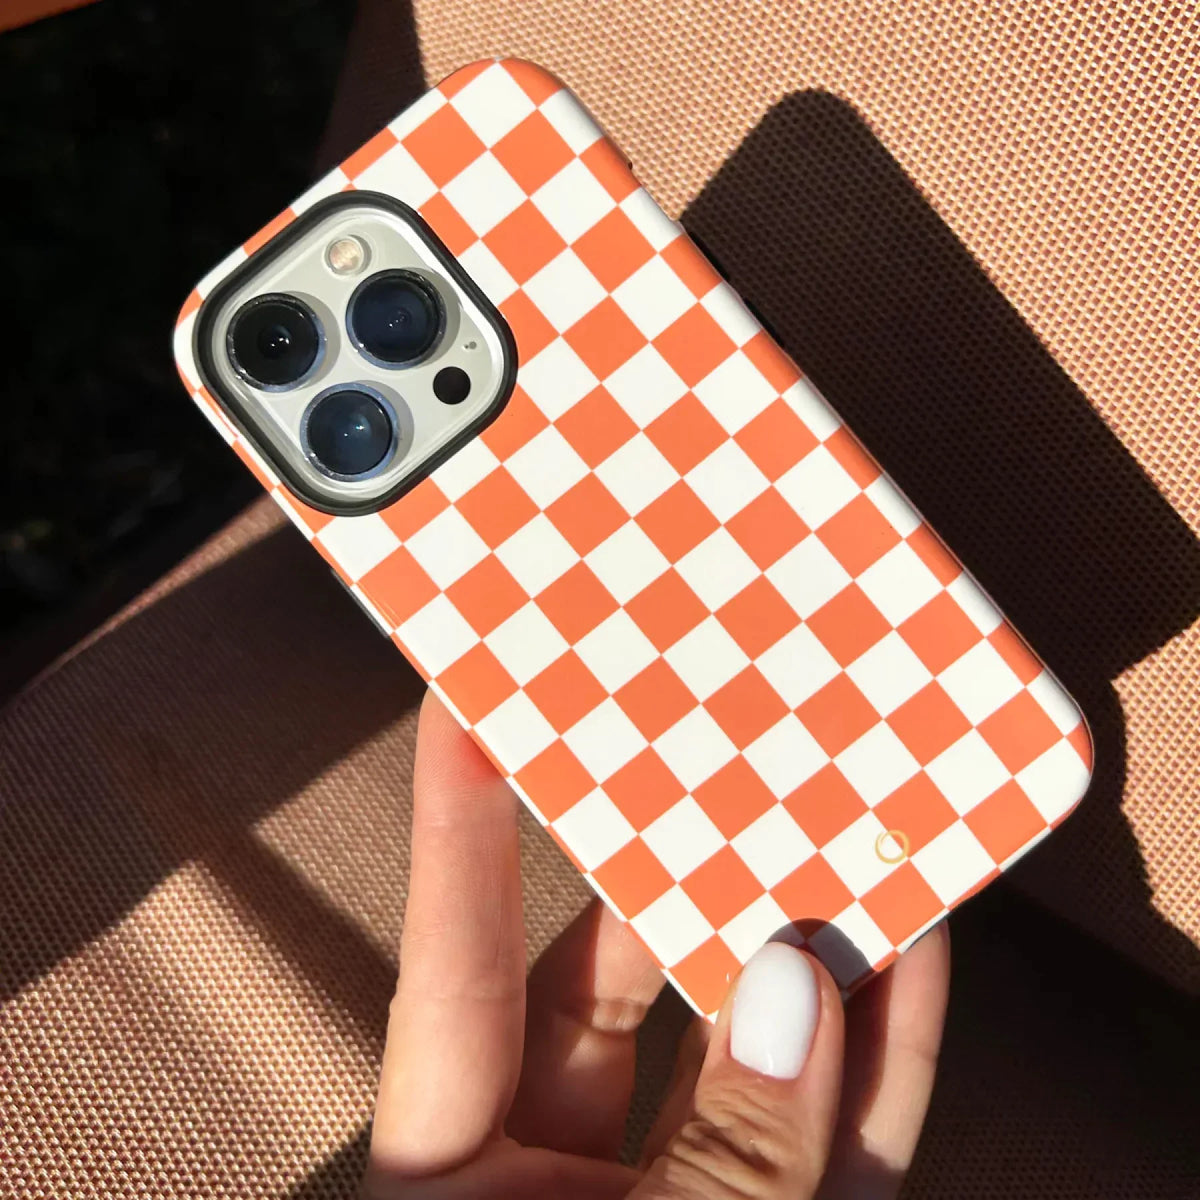 Peach Checkerboard iPhone Case - iPhone 11 Pro Max Cases